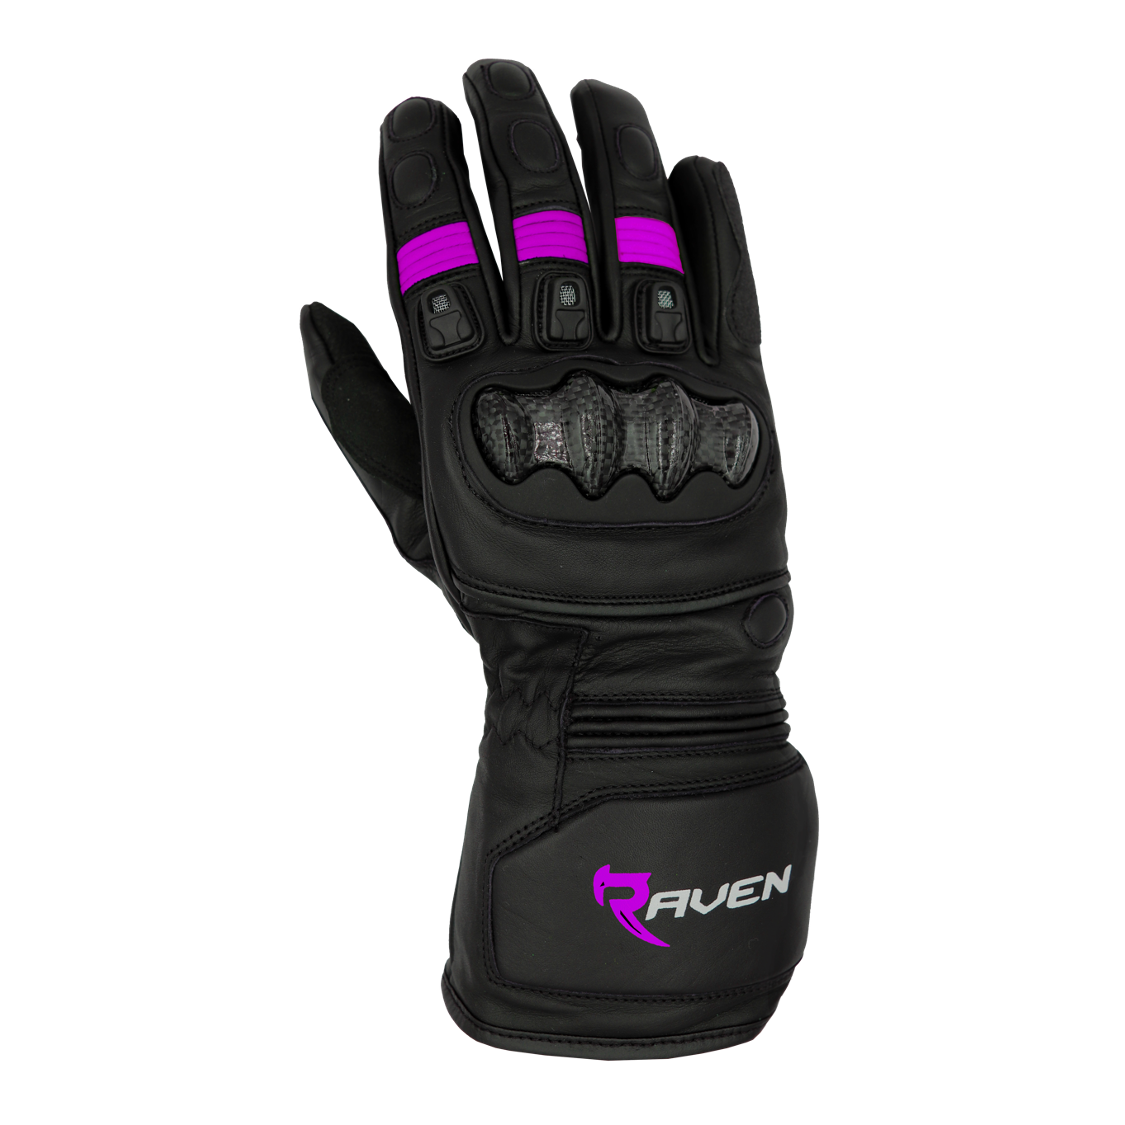 ROGUE - Black and Pink Leather Motorcycle Long Cuff Gauntlet Glove by RAVEN Moto